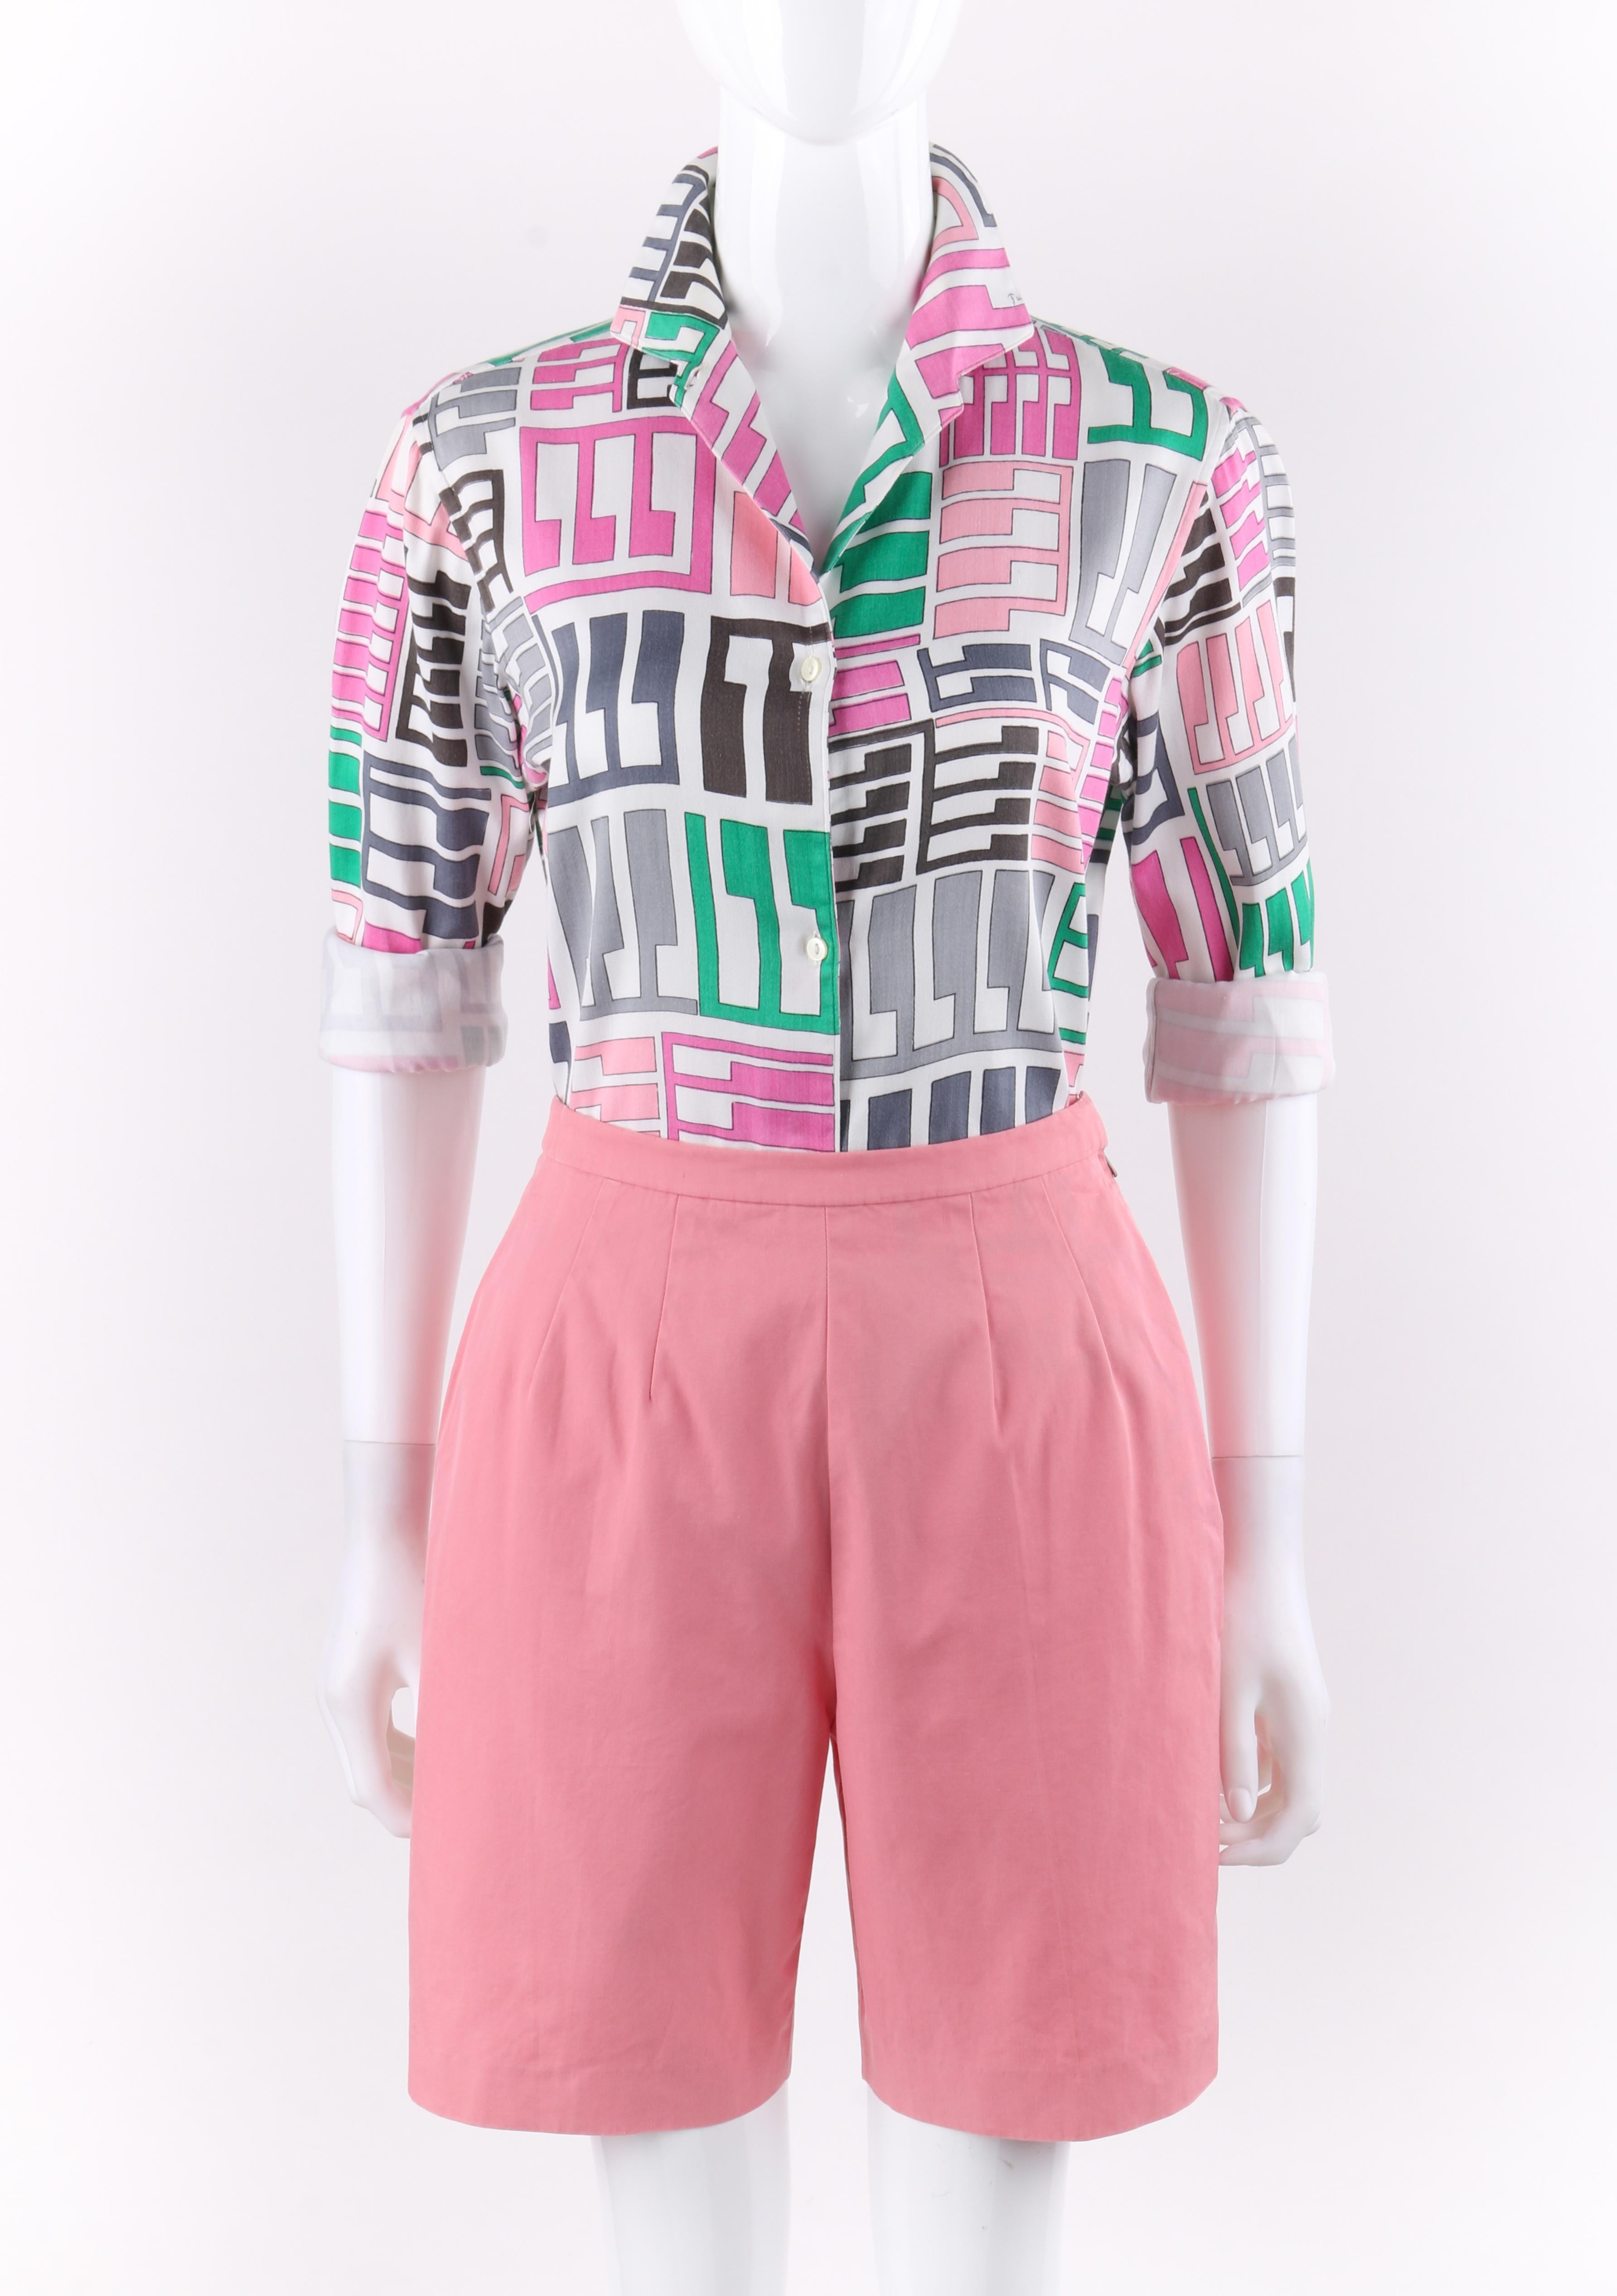 EMILIO PUCCI c.1960’s 2 Pc Pink Multi-color Tribal Cotton Button Front Shirt Shorts Set
 
Circa: 1960’s 
Label(s): Emilio Pucci  
Style: Button-Up Shirt, shorts 
Color(s): Shades of pink, green, grey, white and black. 
Lined: No
Marked Fabric